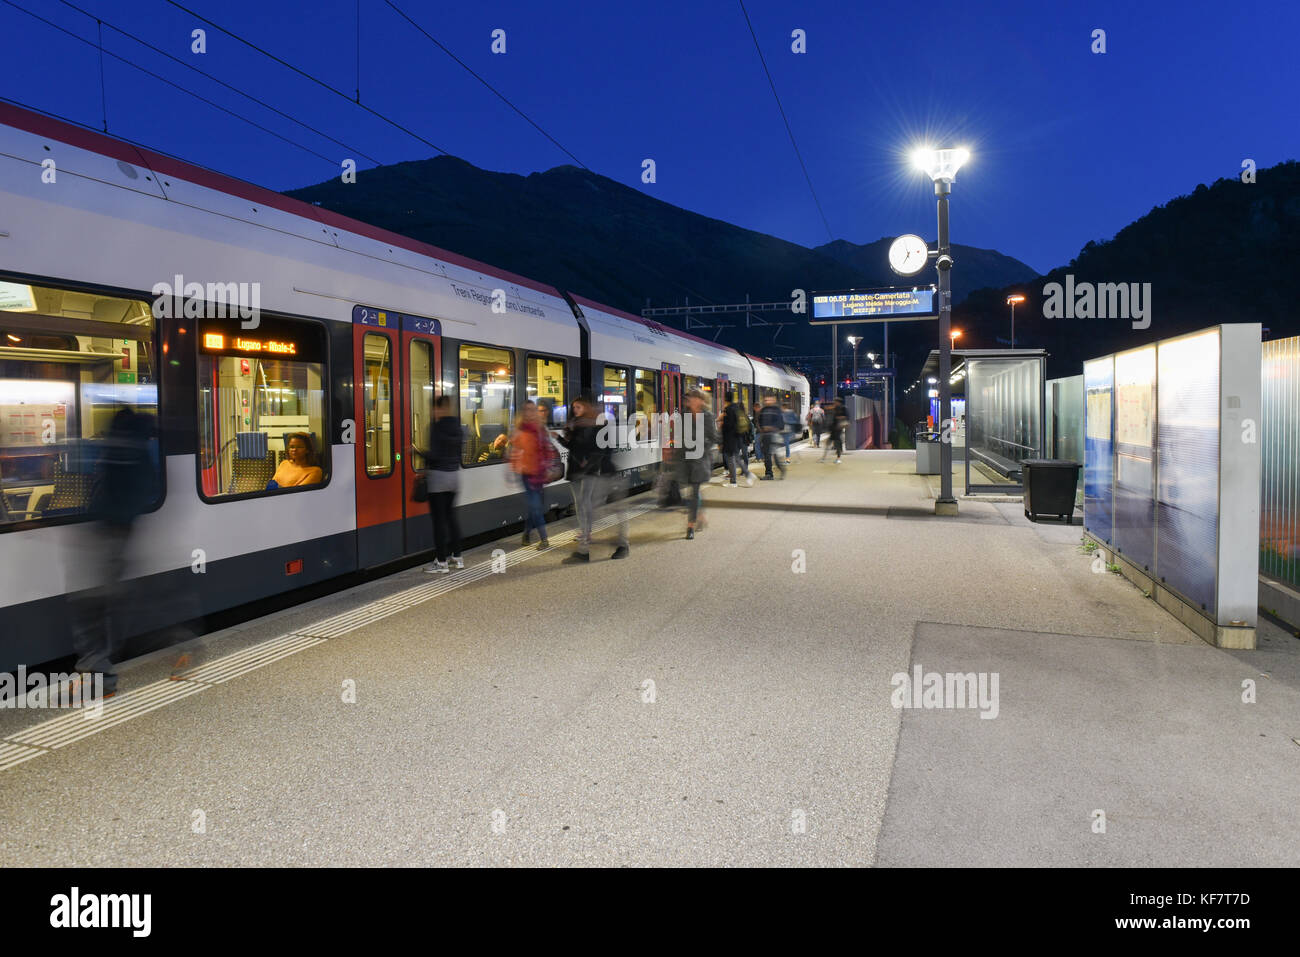 Lamone, Switzerland - 5 october 2017: Train station of Lamone with people on movement in rush hour Stock Photo